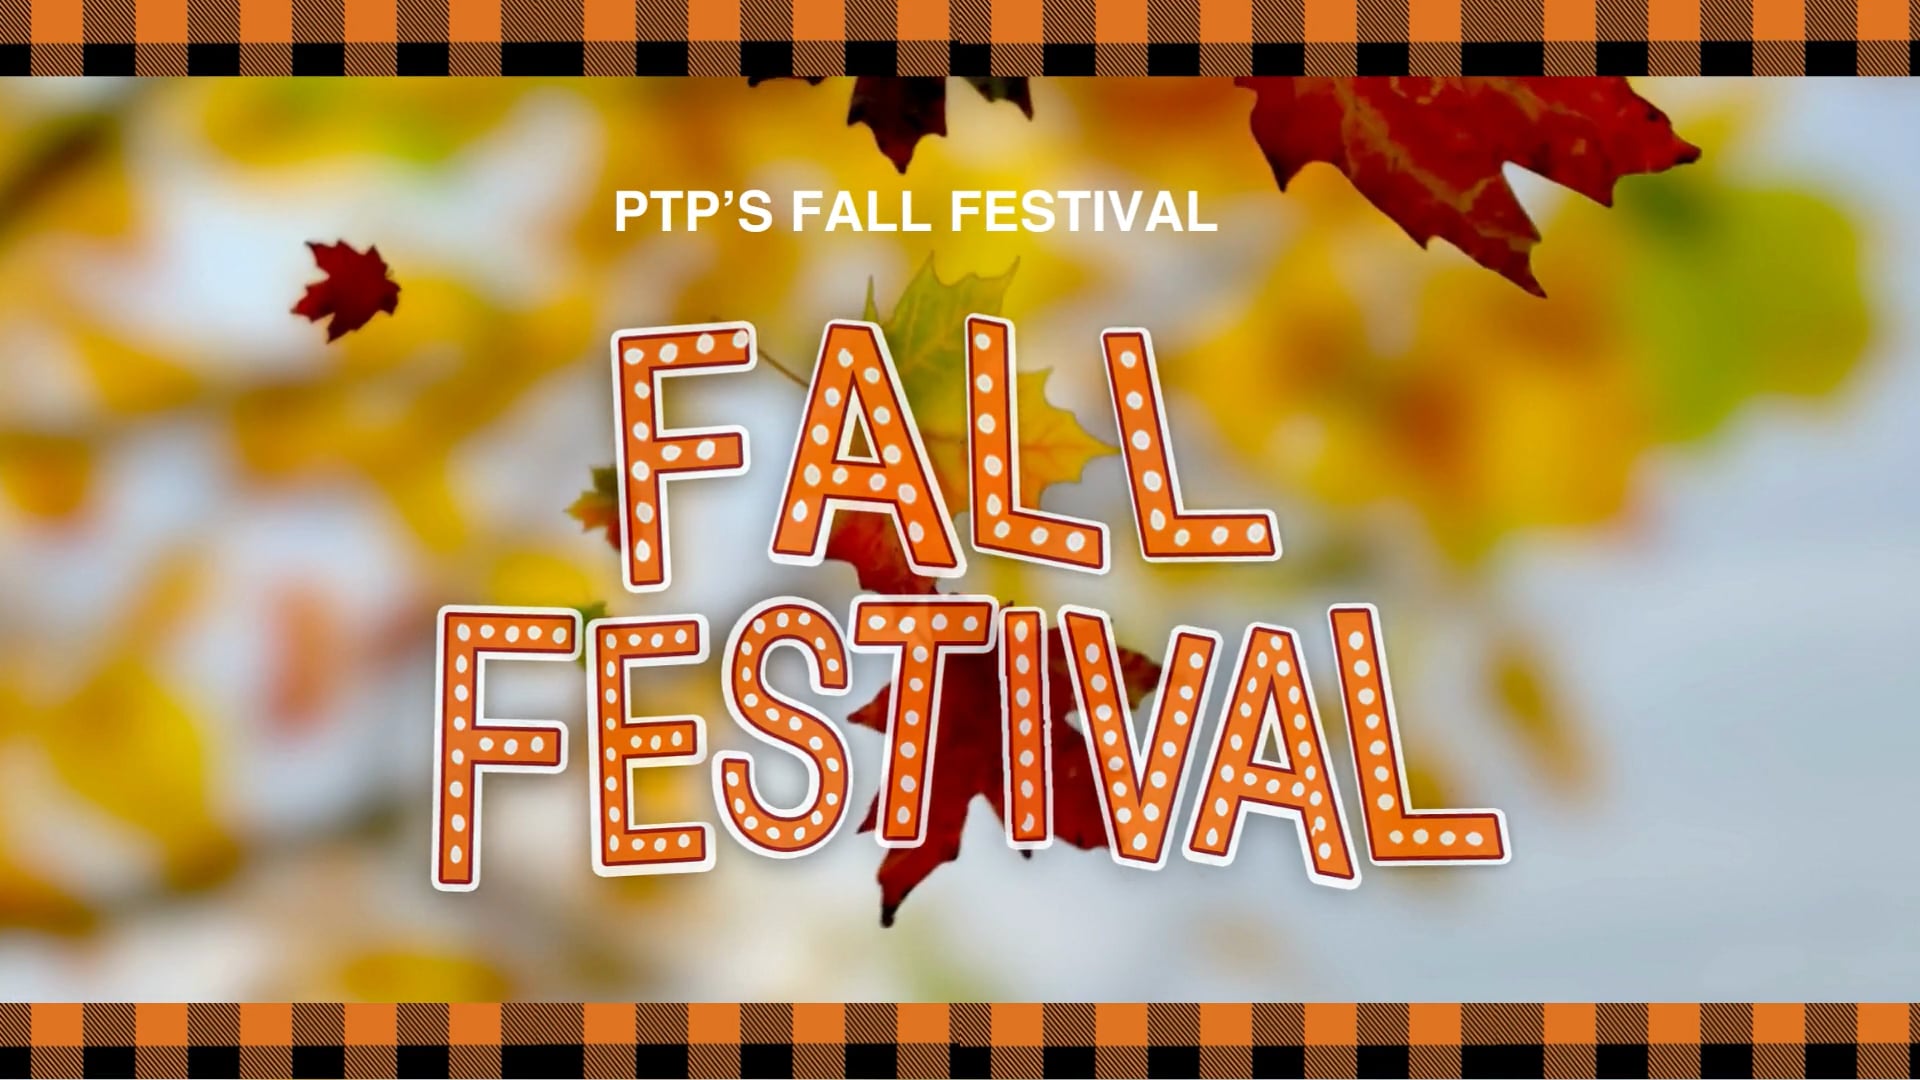 Join us for the Annual PTP Fall Festival on November 4th!